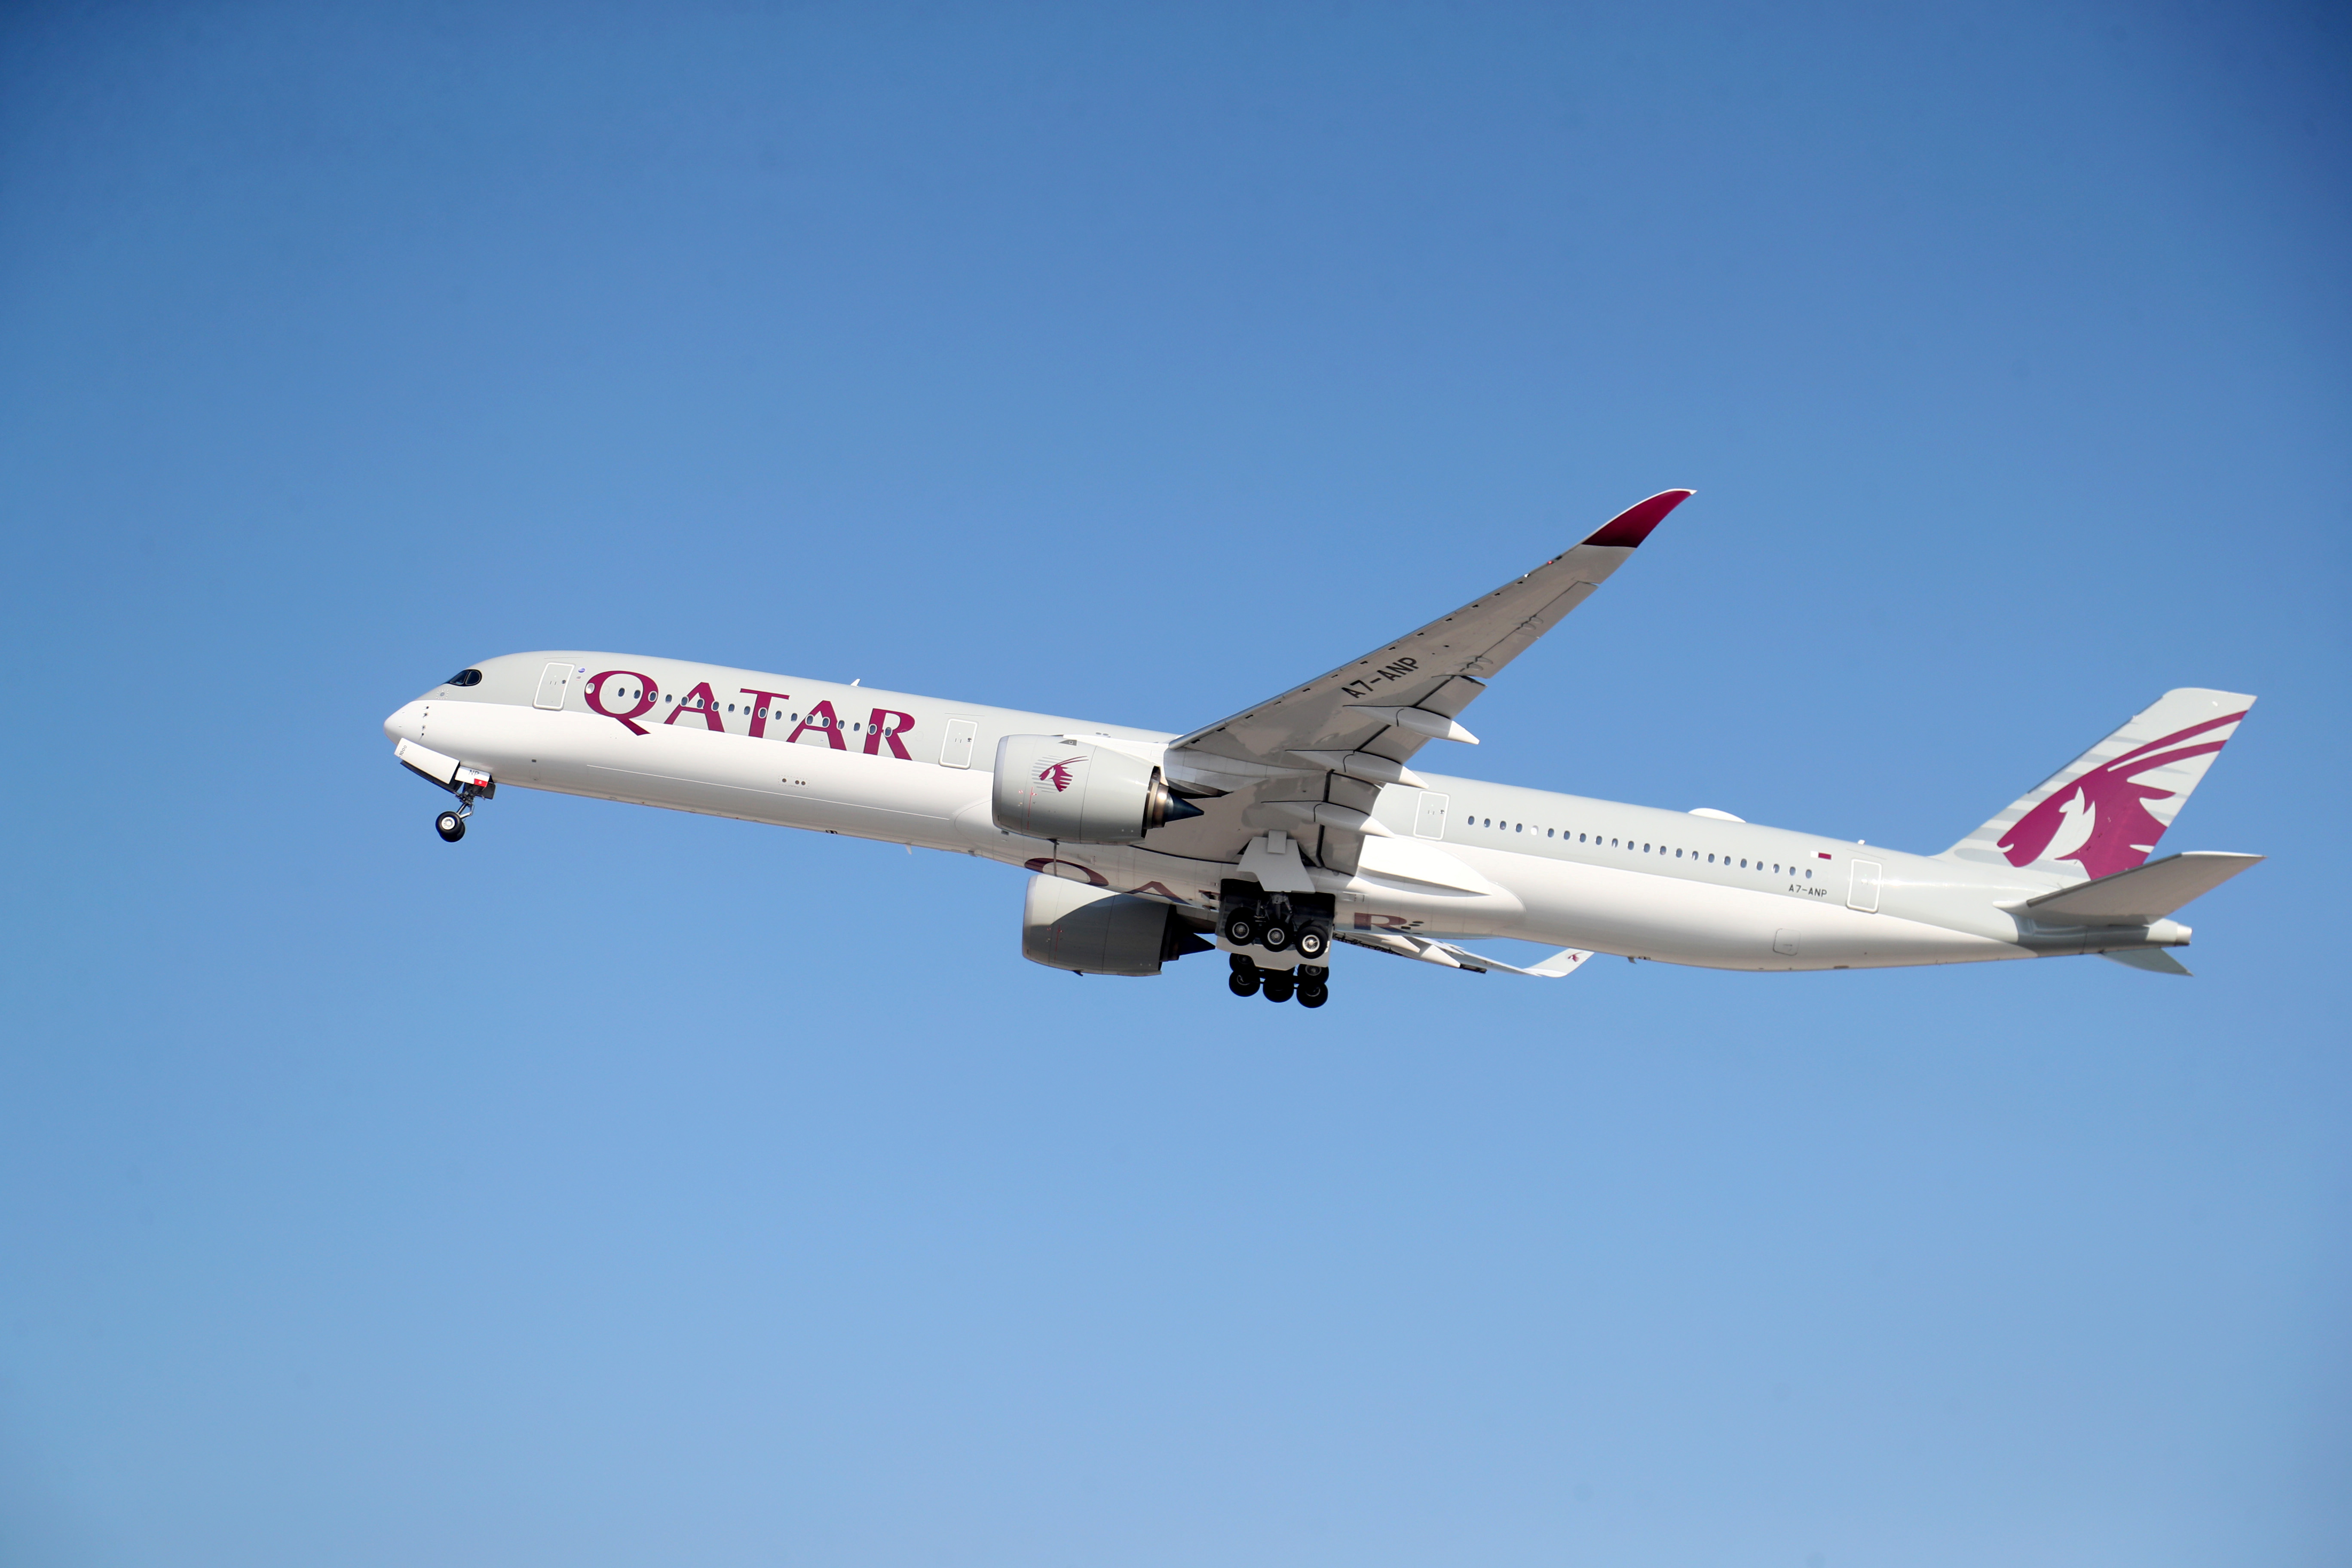 A Qatar Airways plane takes off at Hamad International Airport in Doha